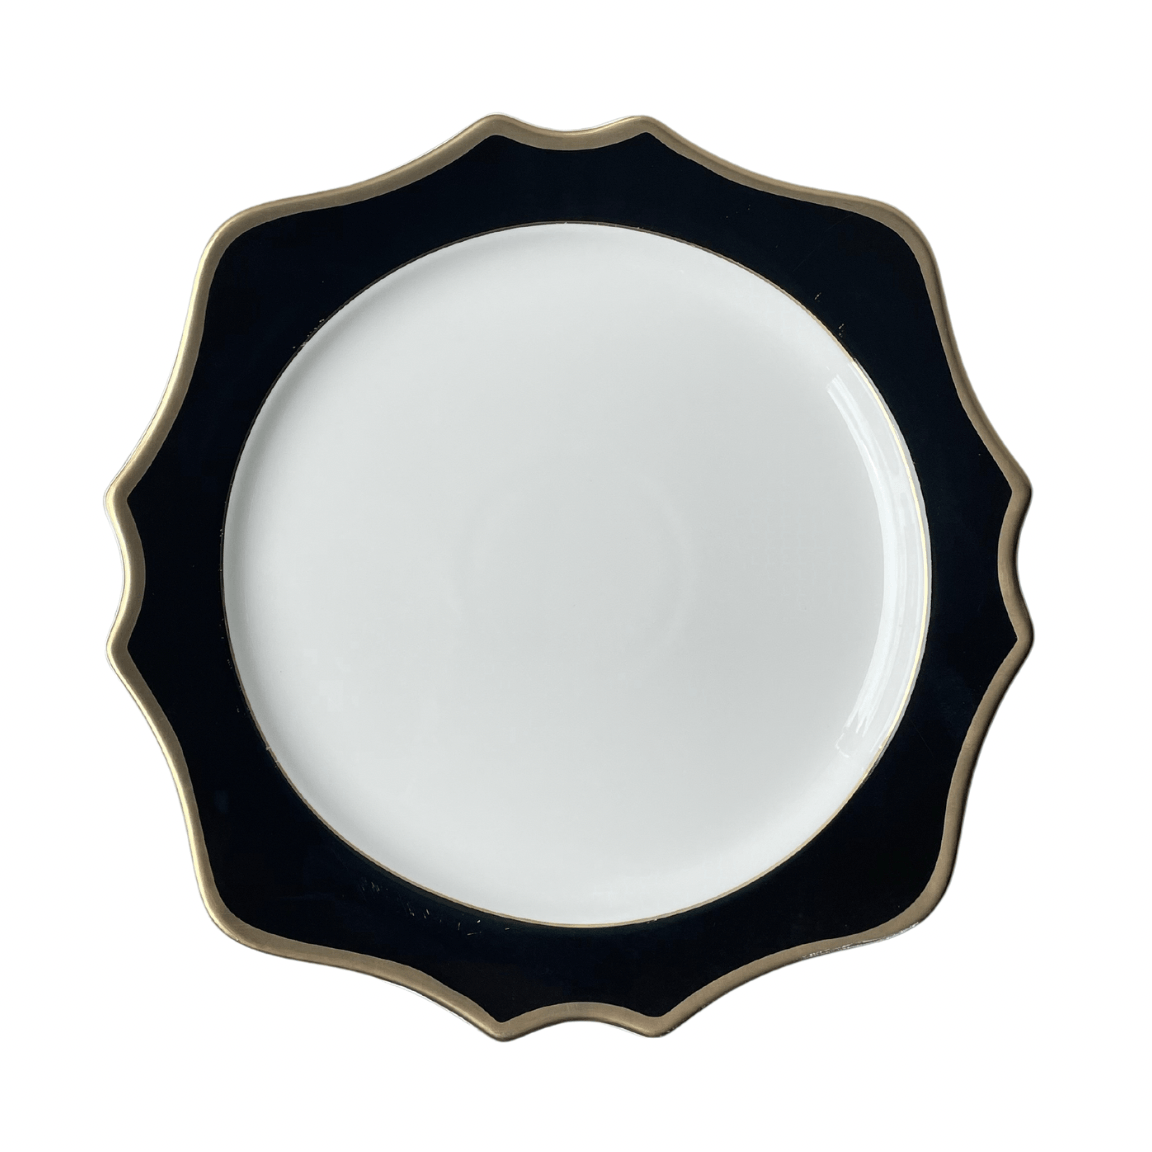 Ornate Black and Gold Charger Plate Hire